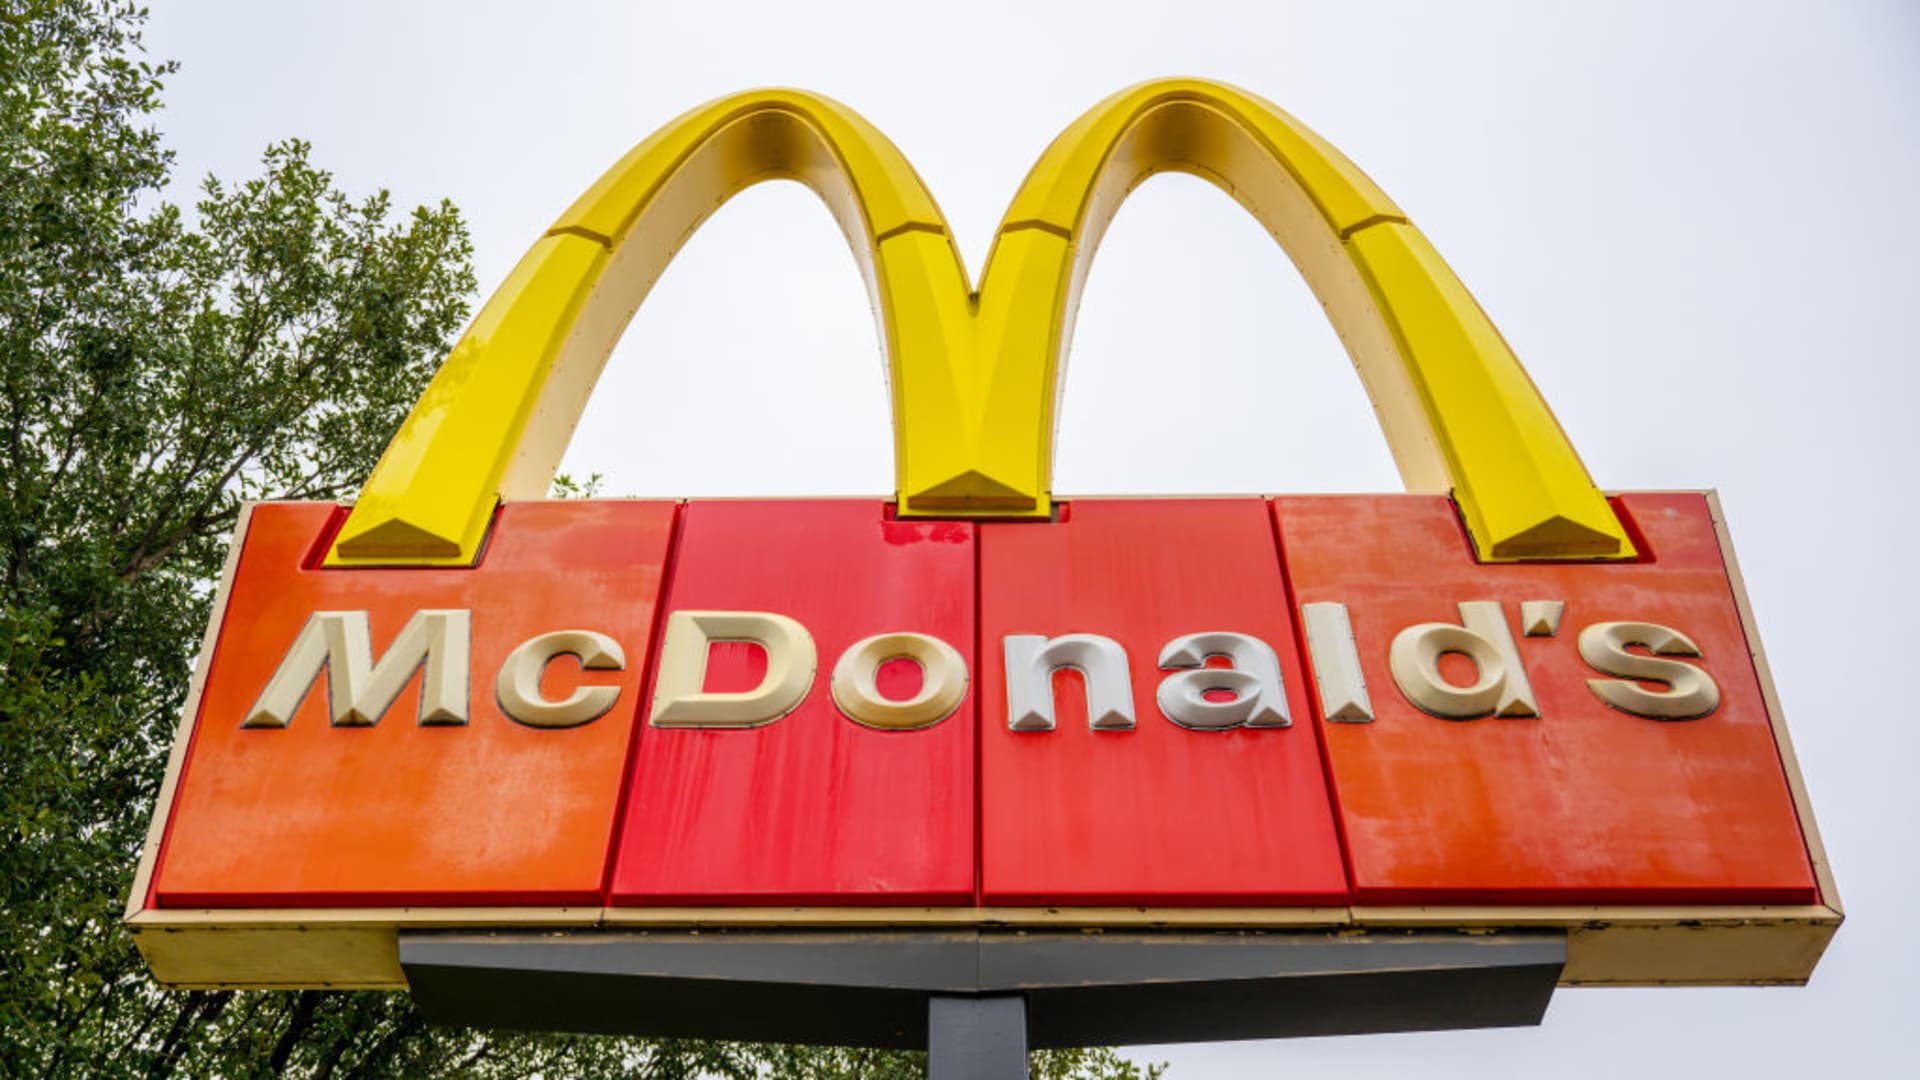 mcdonald’s-$5-value-meal-is-coming-in-june-—-and-staying-for-just-a-month